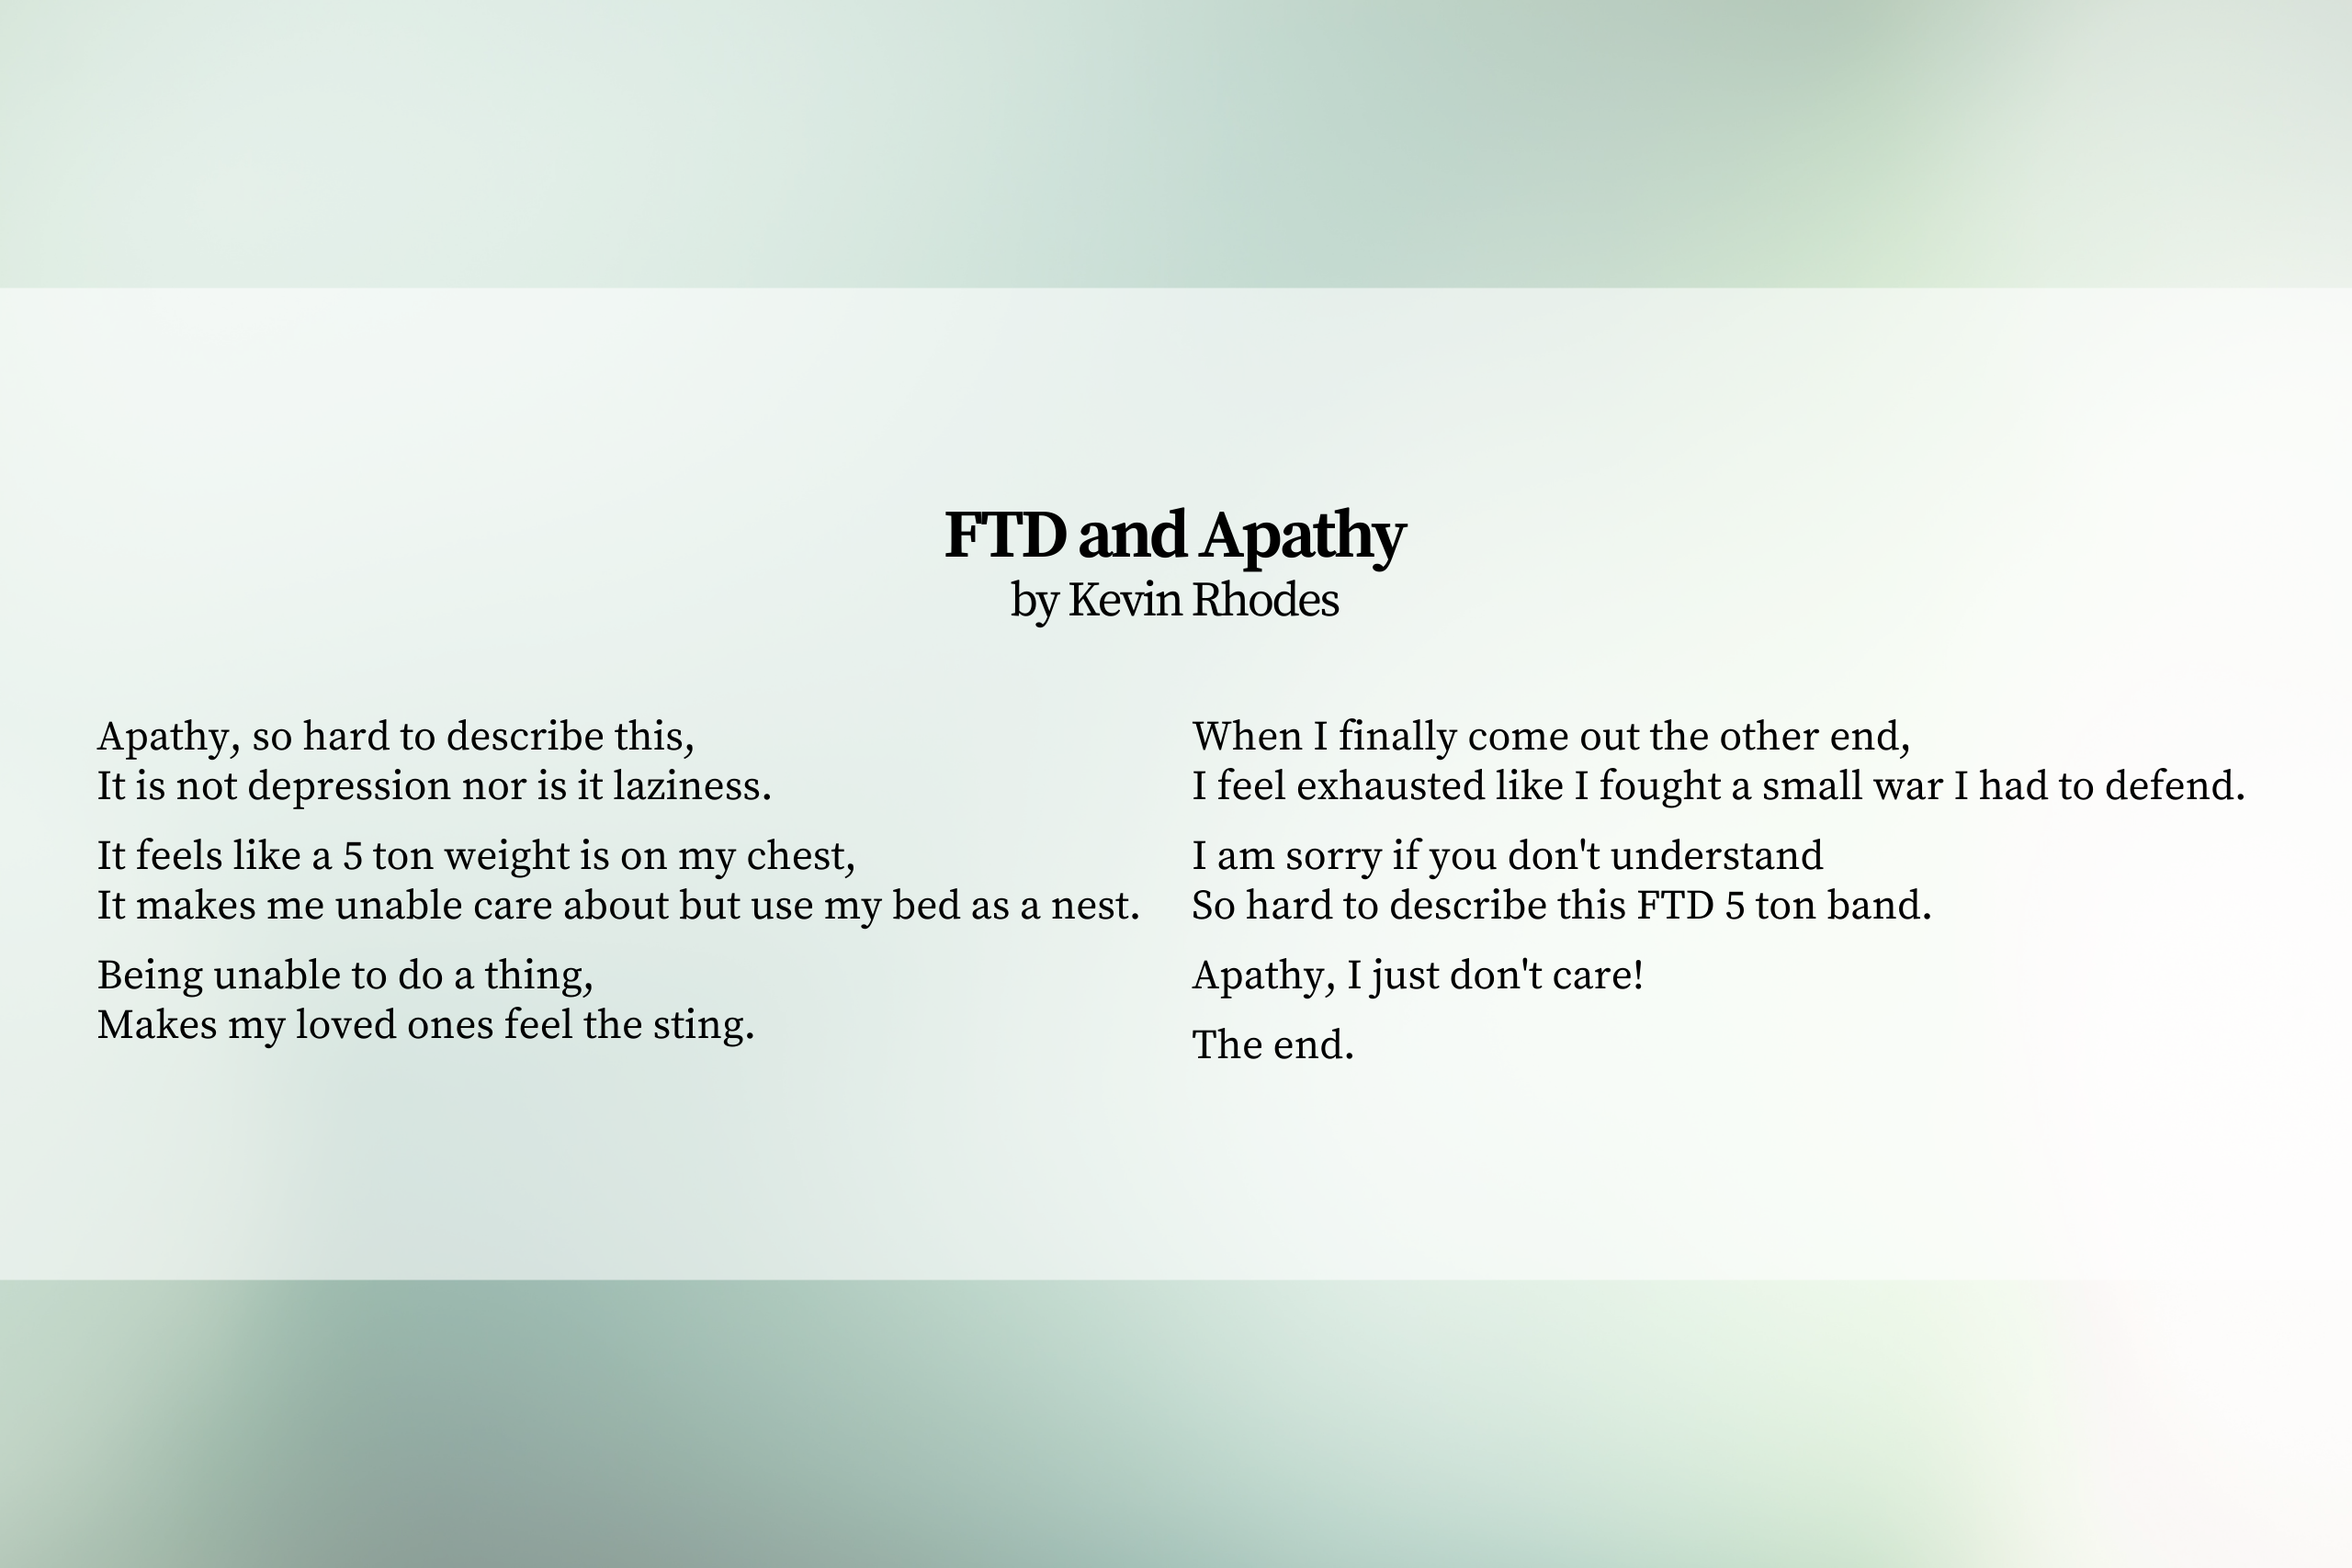 FTD and Apathy